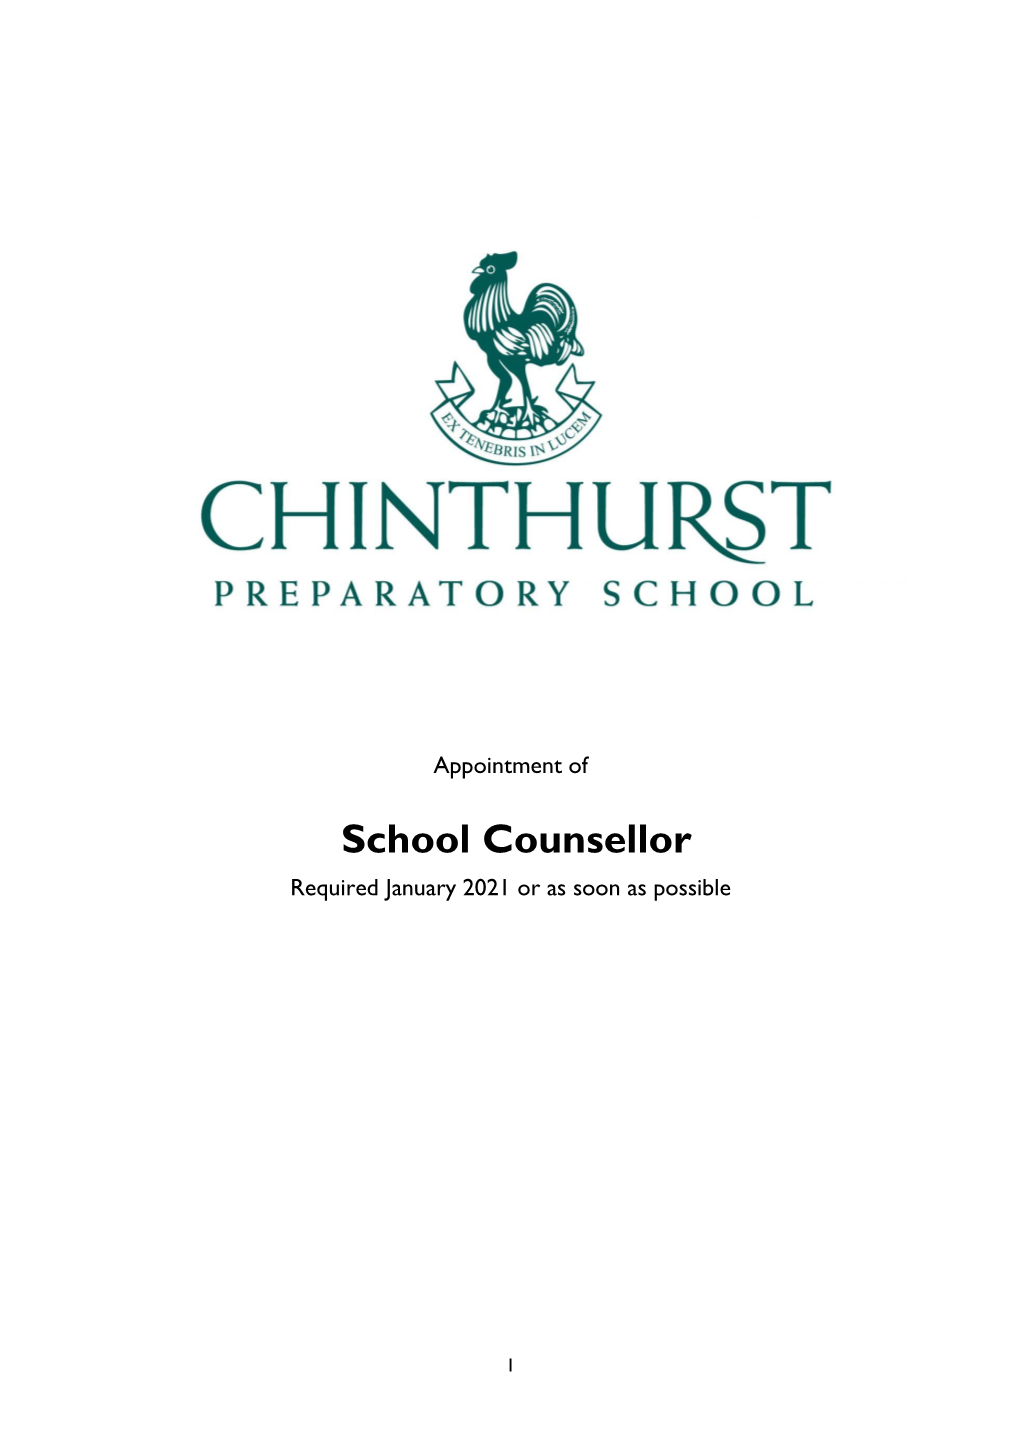 School Counsellor Required January 2021 Or As Soon As Possible